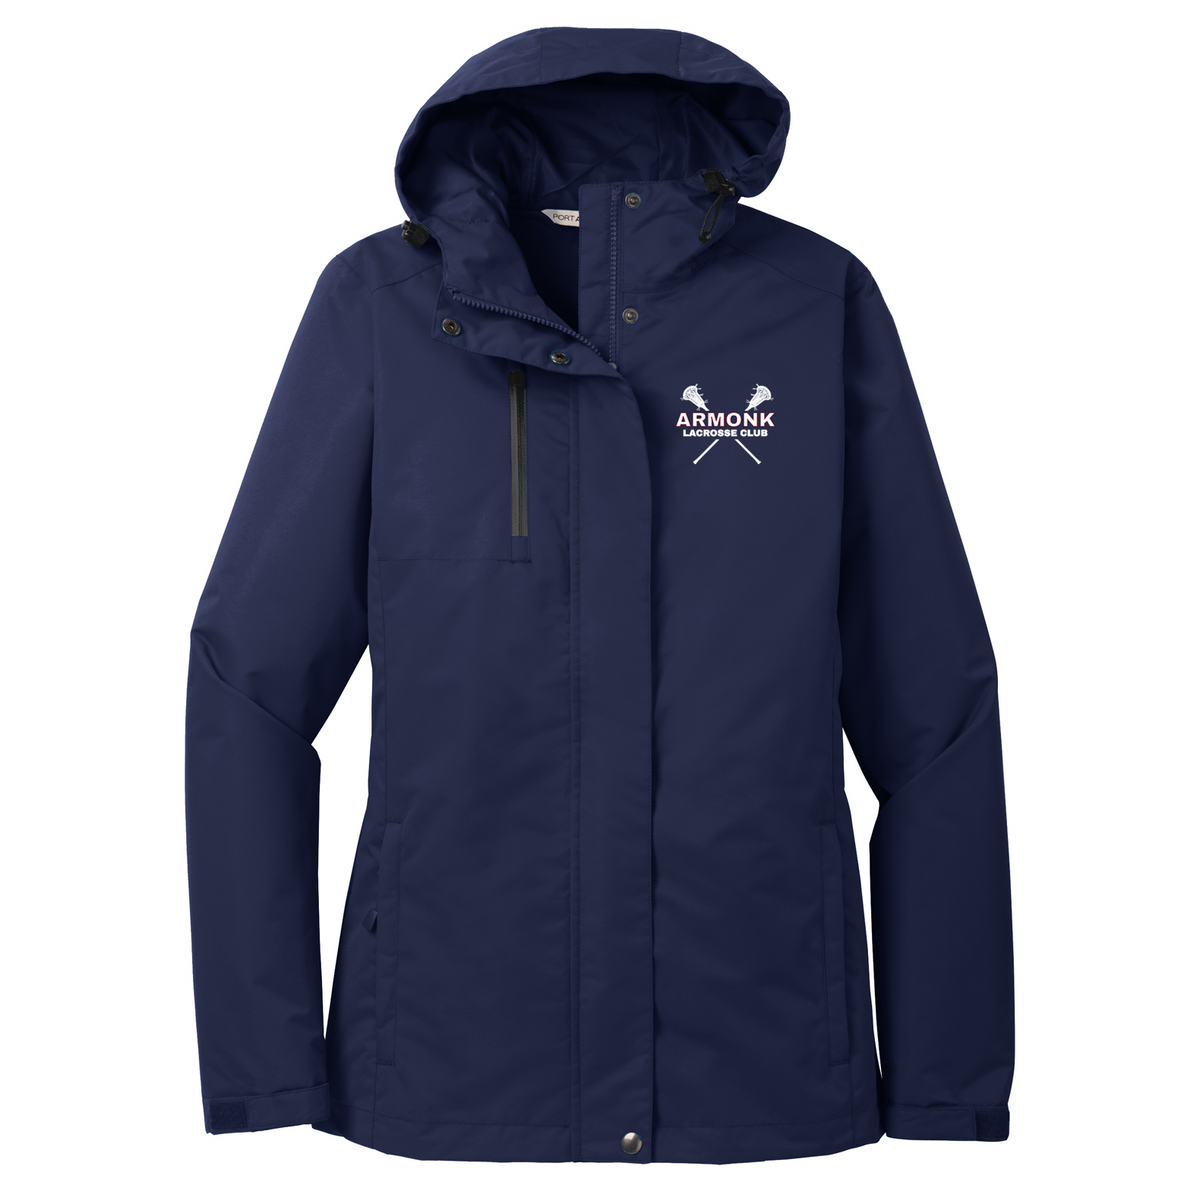 Armonk Lacrosse Club Port Authority Ladies All-Conditions Jacket (Adult Only)